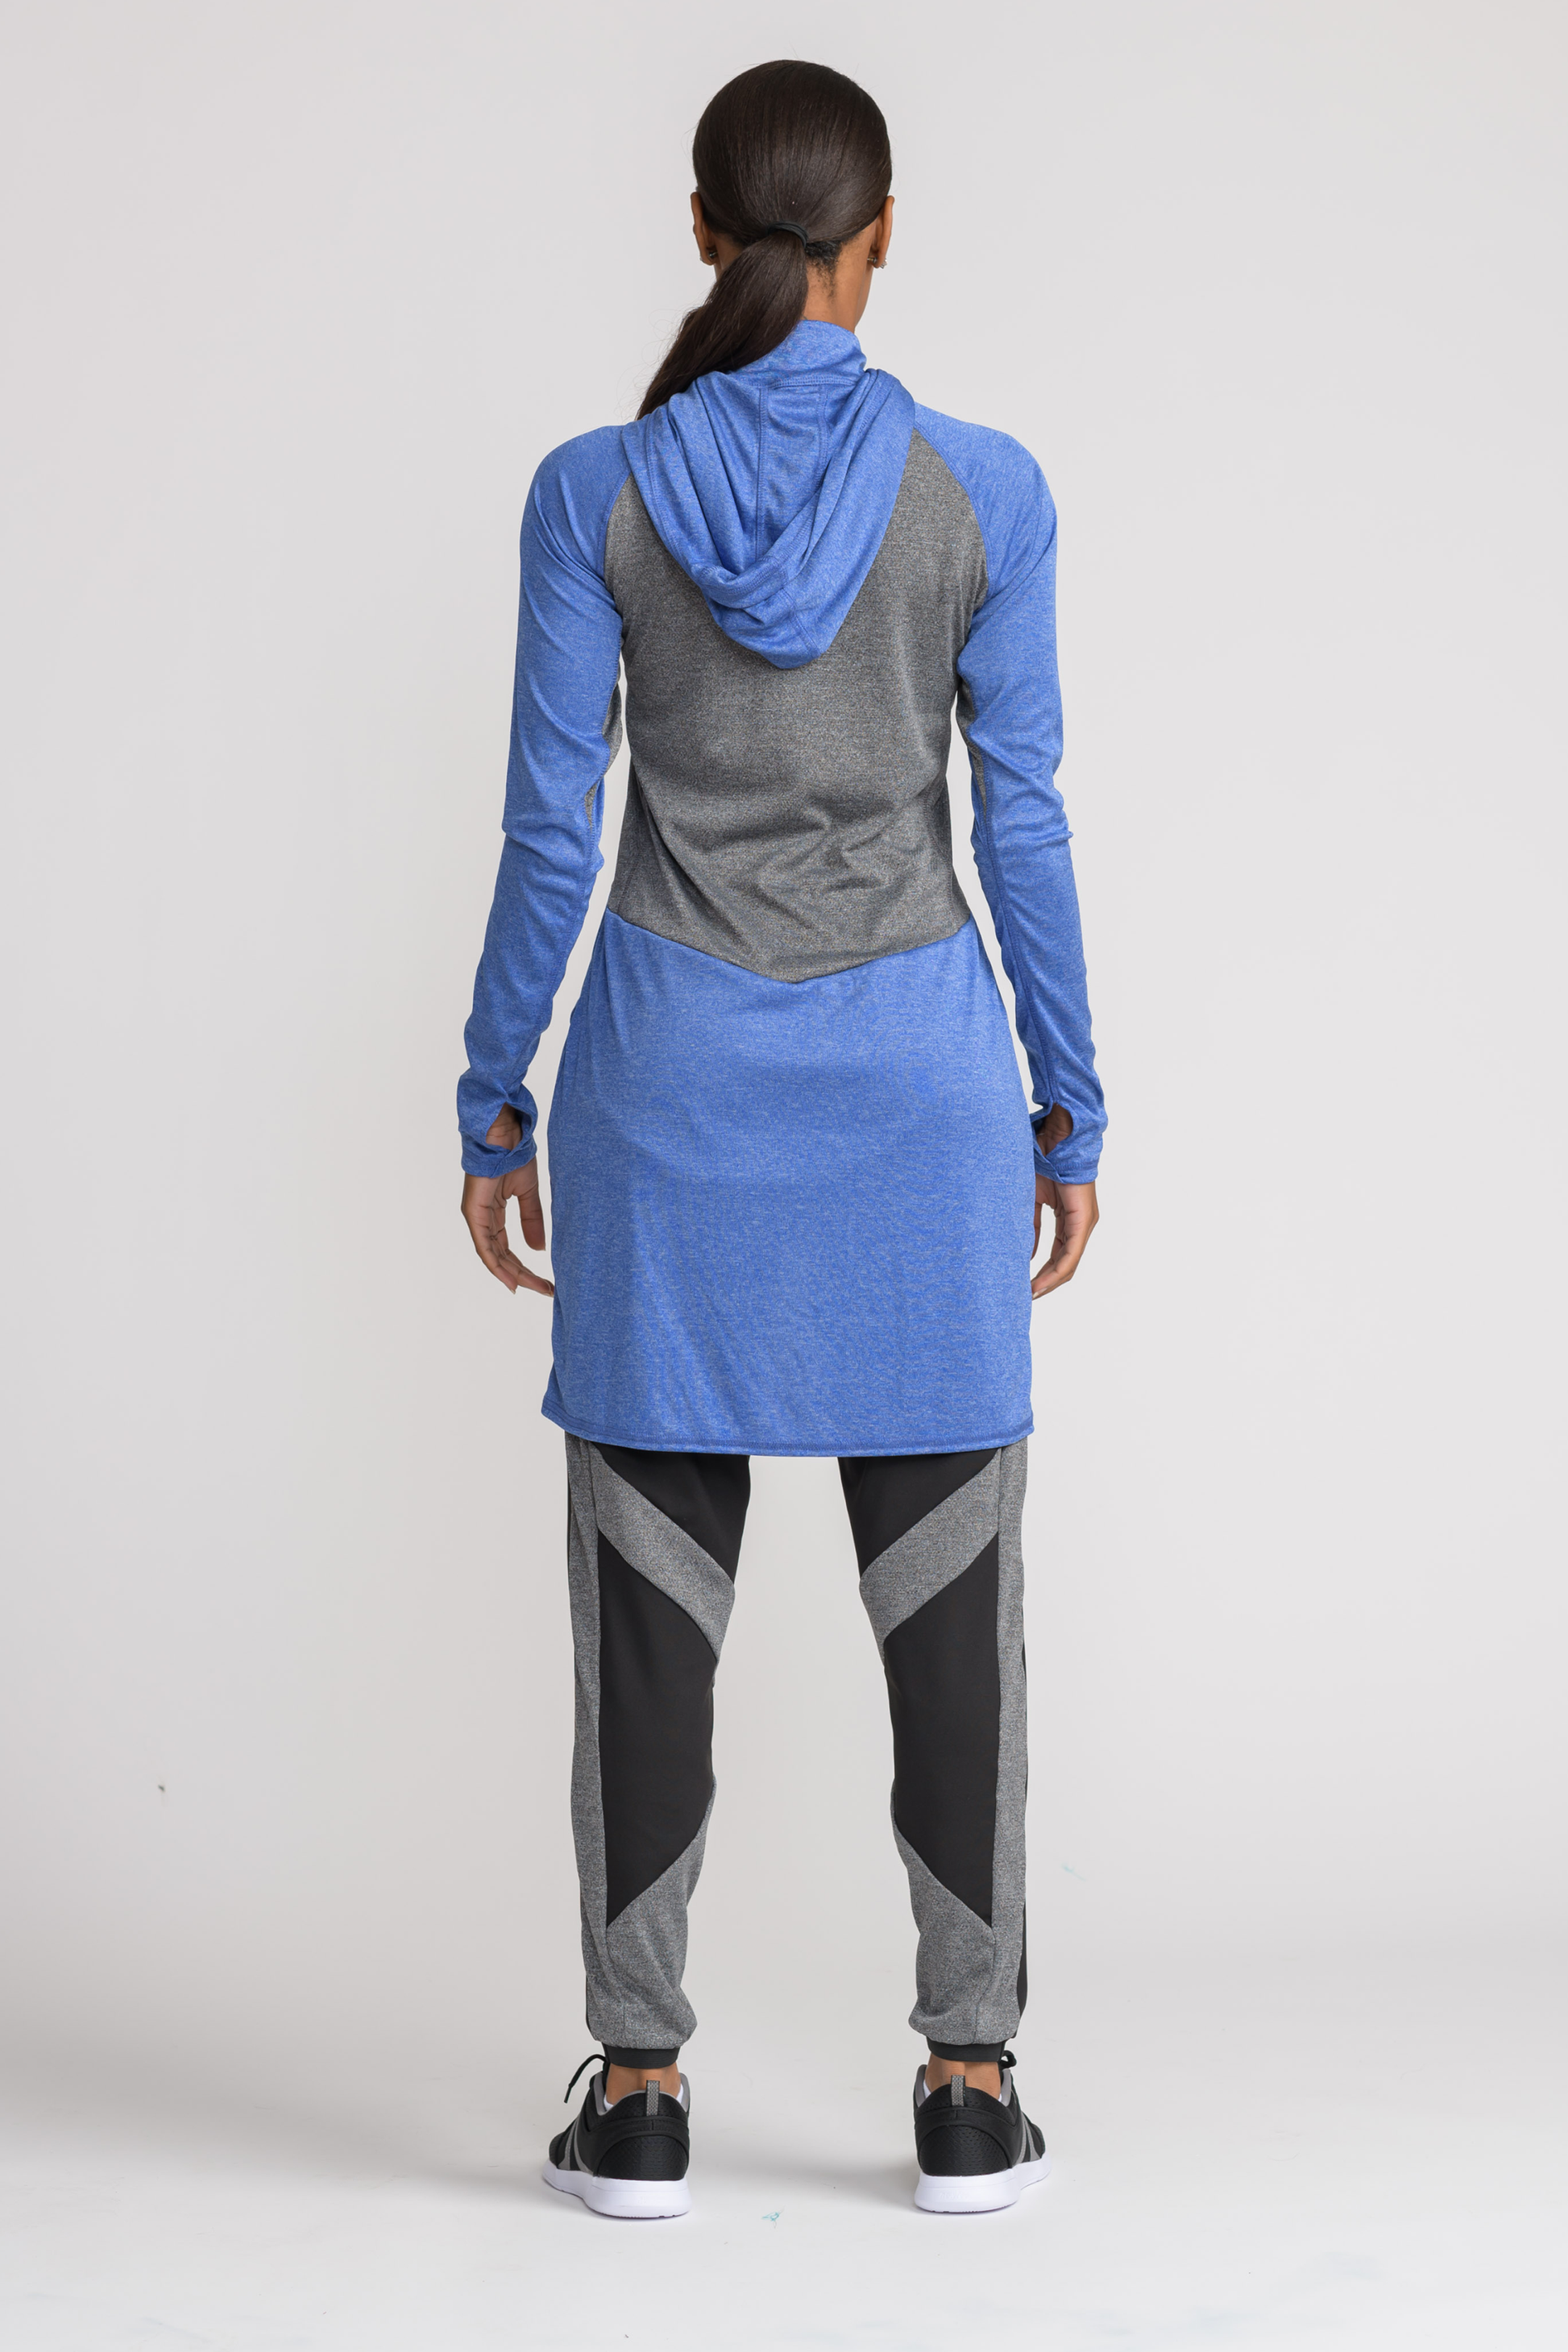 Performance Tech Top - Blue - sportswear tops - Dignitii Activewear - Third Culture Boutique